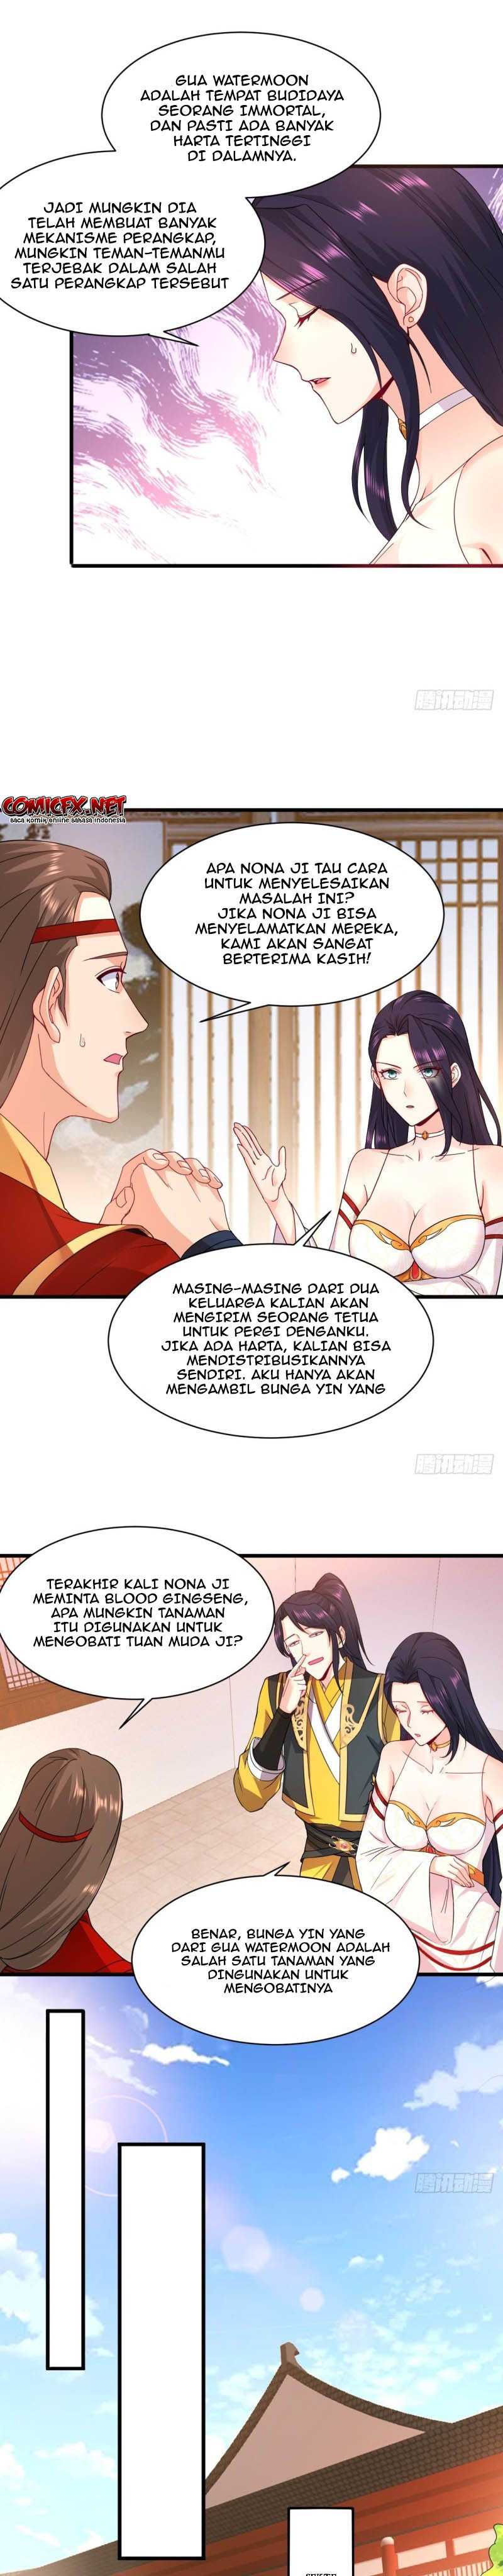 Forced To Become the Villain’s Son-in-law Chapter 79